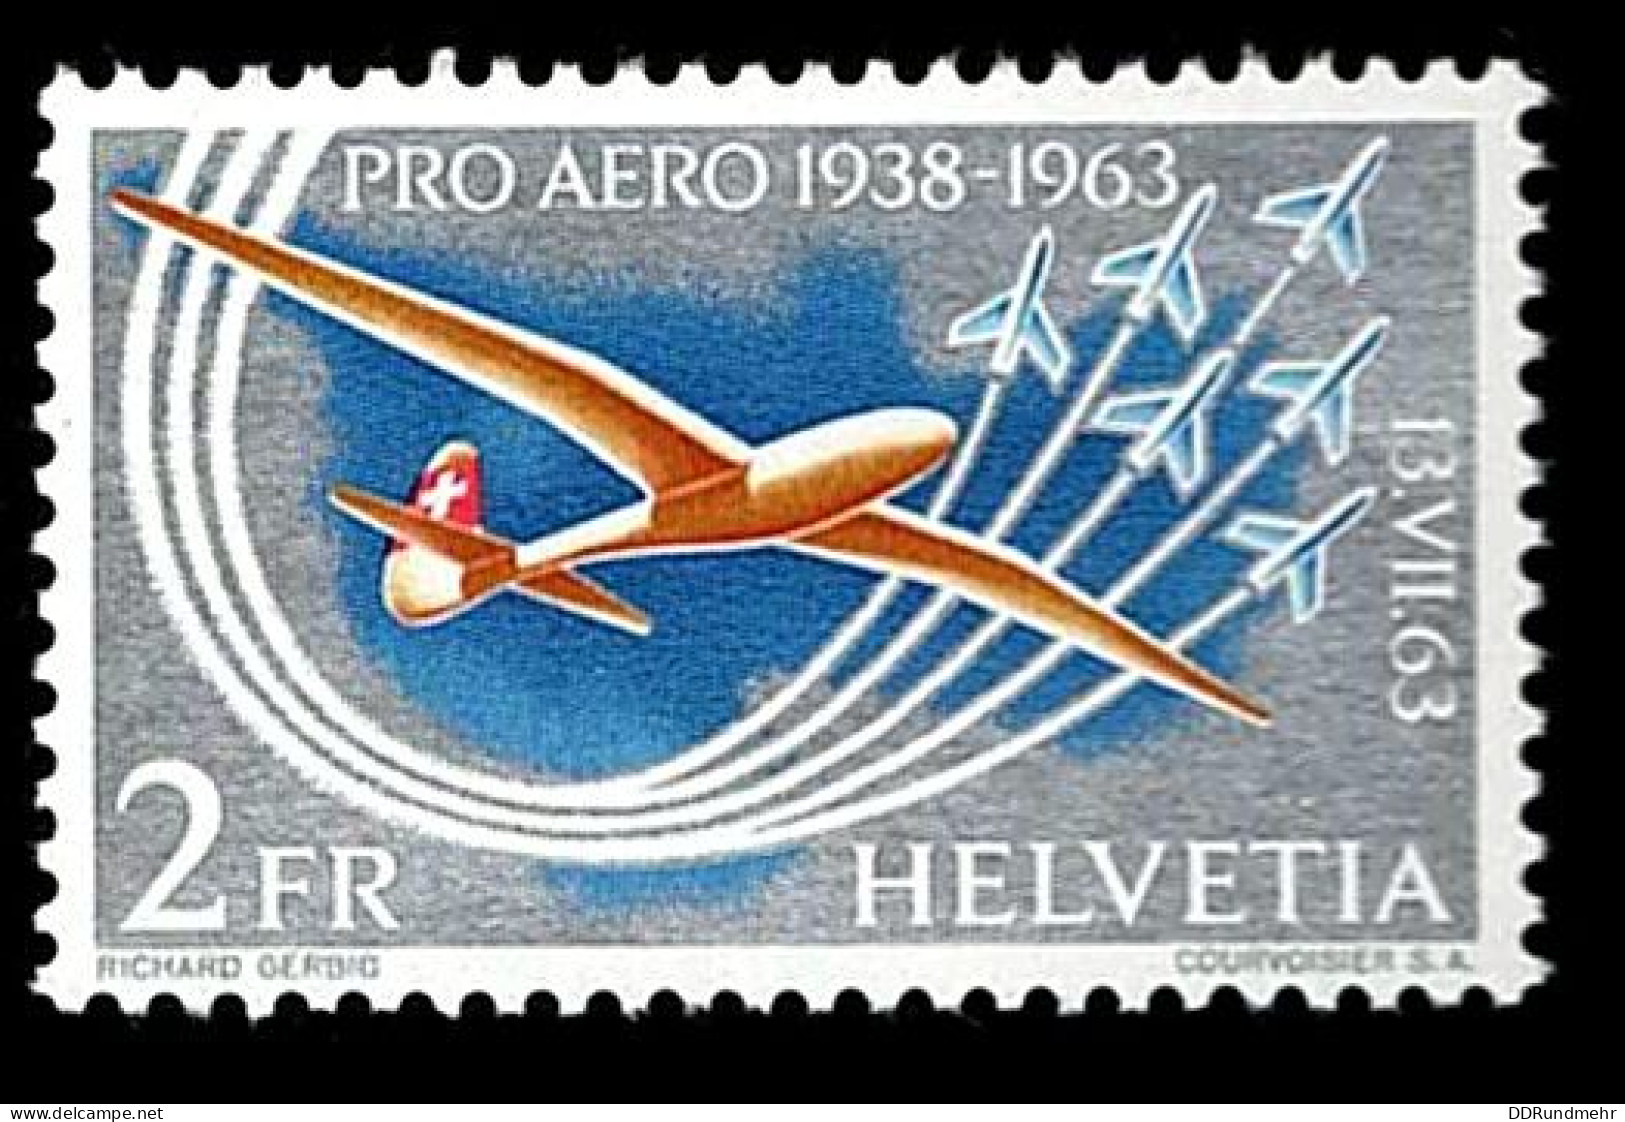 1963 Pro Aero  Michel CH 780 Stamp Number CH C46 Yvert Et Tellier CH PA45 Stanley Gibbons CH 681 Unificato CH A45 Xx MNH - Unused Stamps